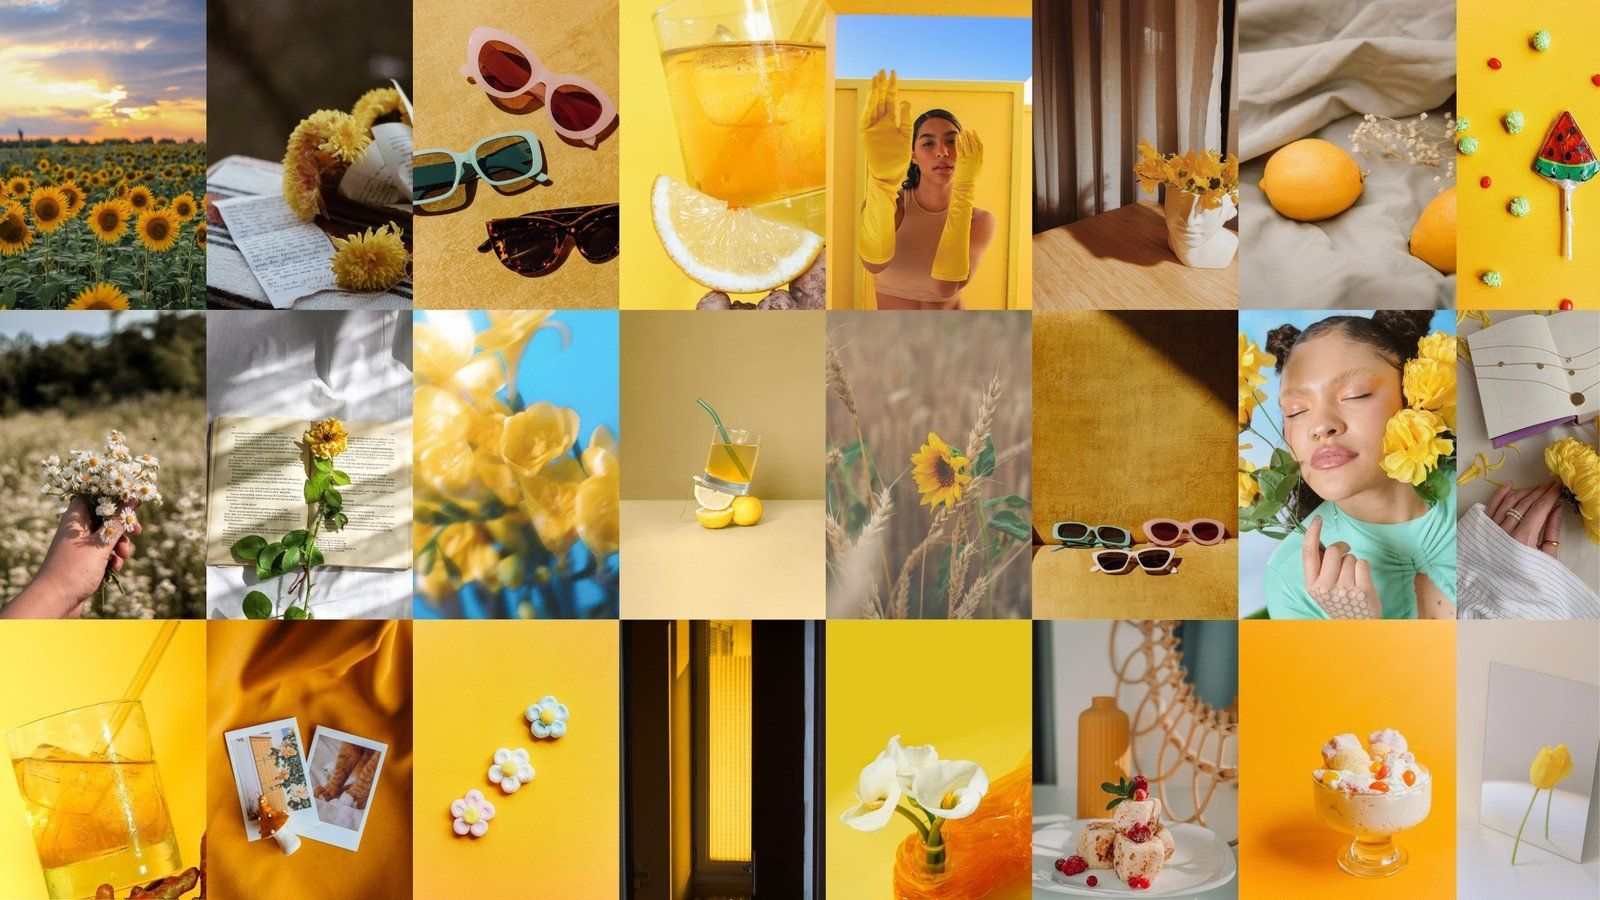 A collage of images of sunflowers, lemons, and people in yellow. - Light yellow